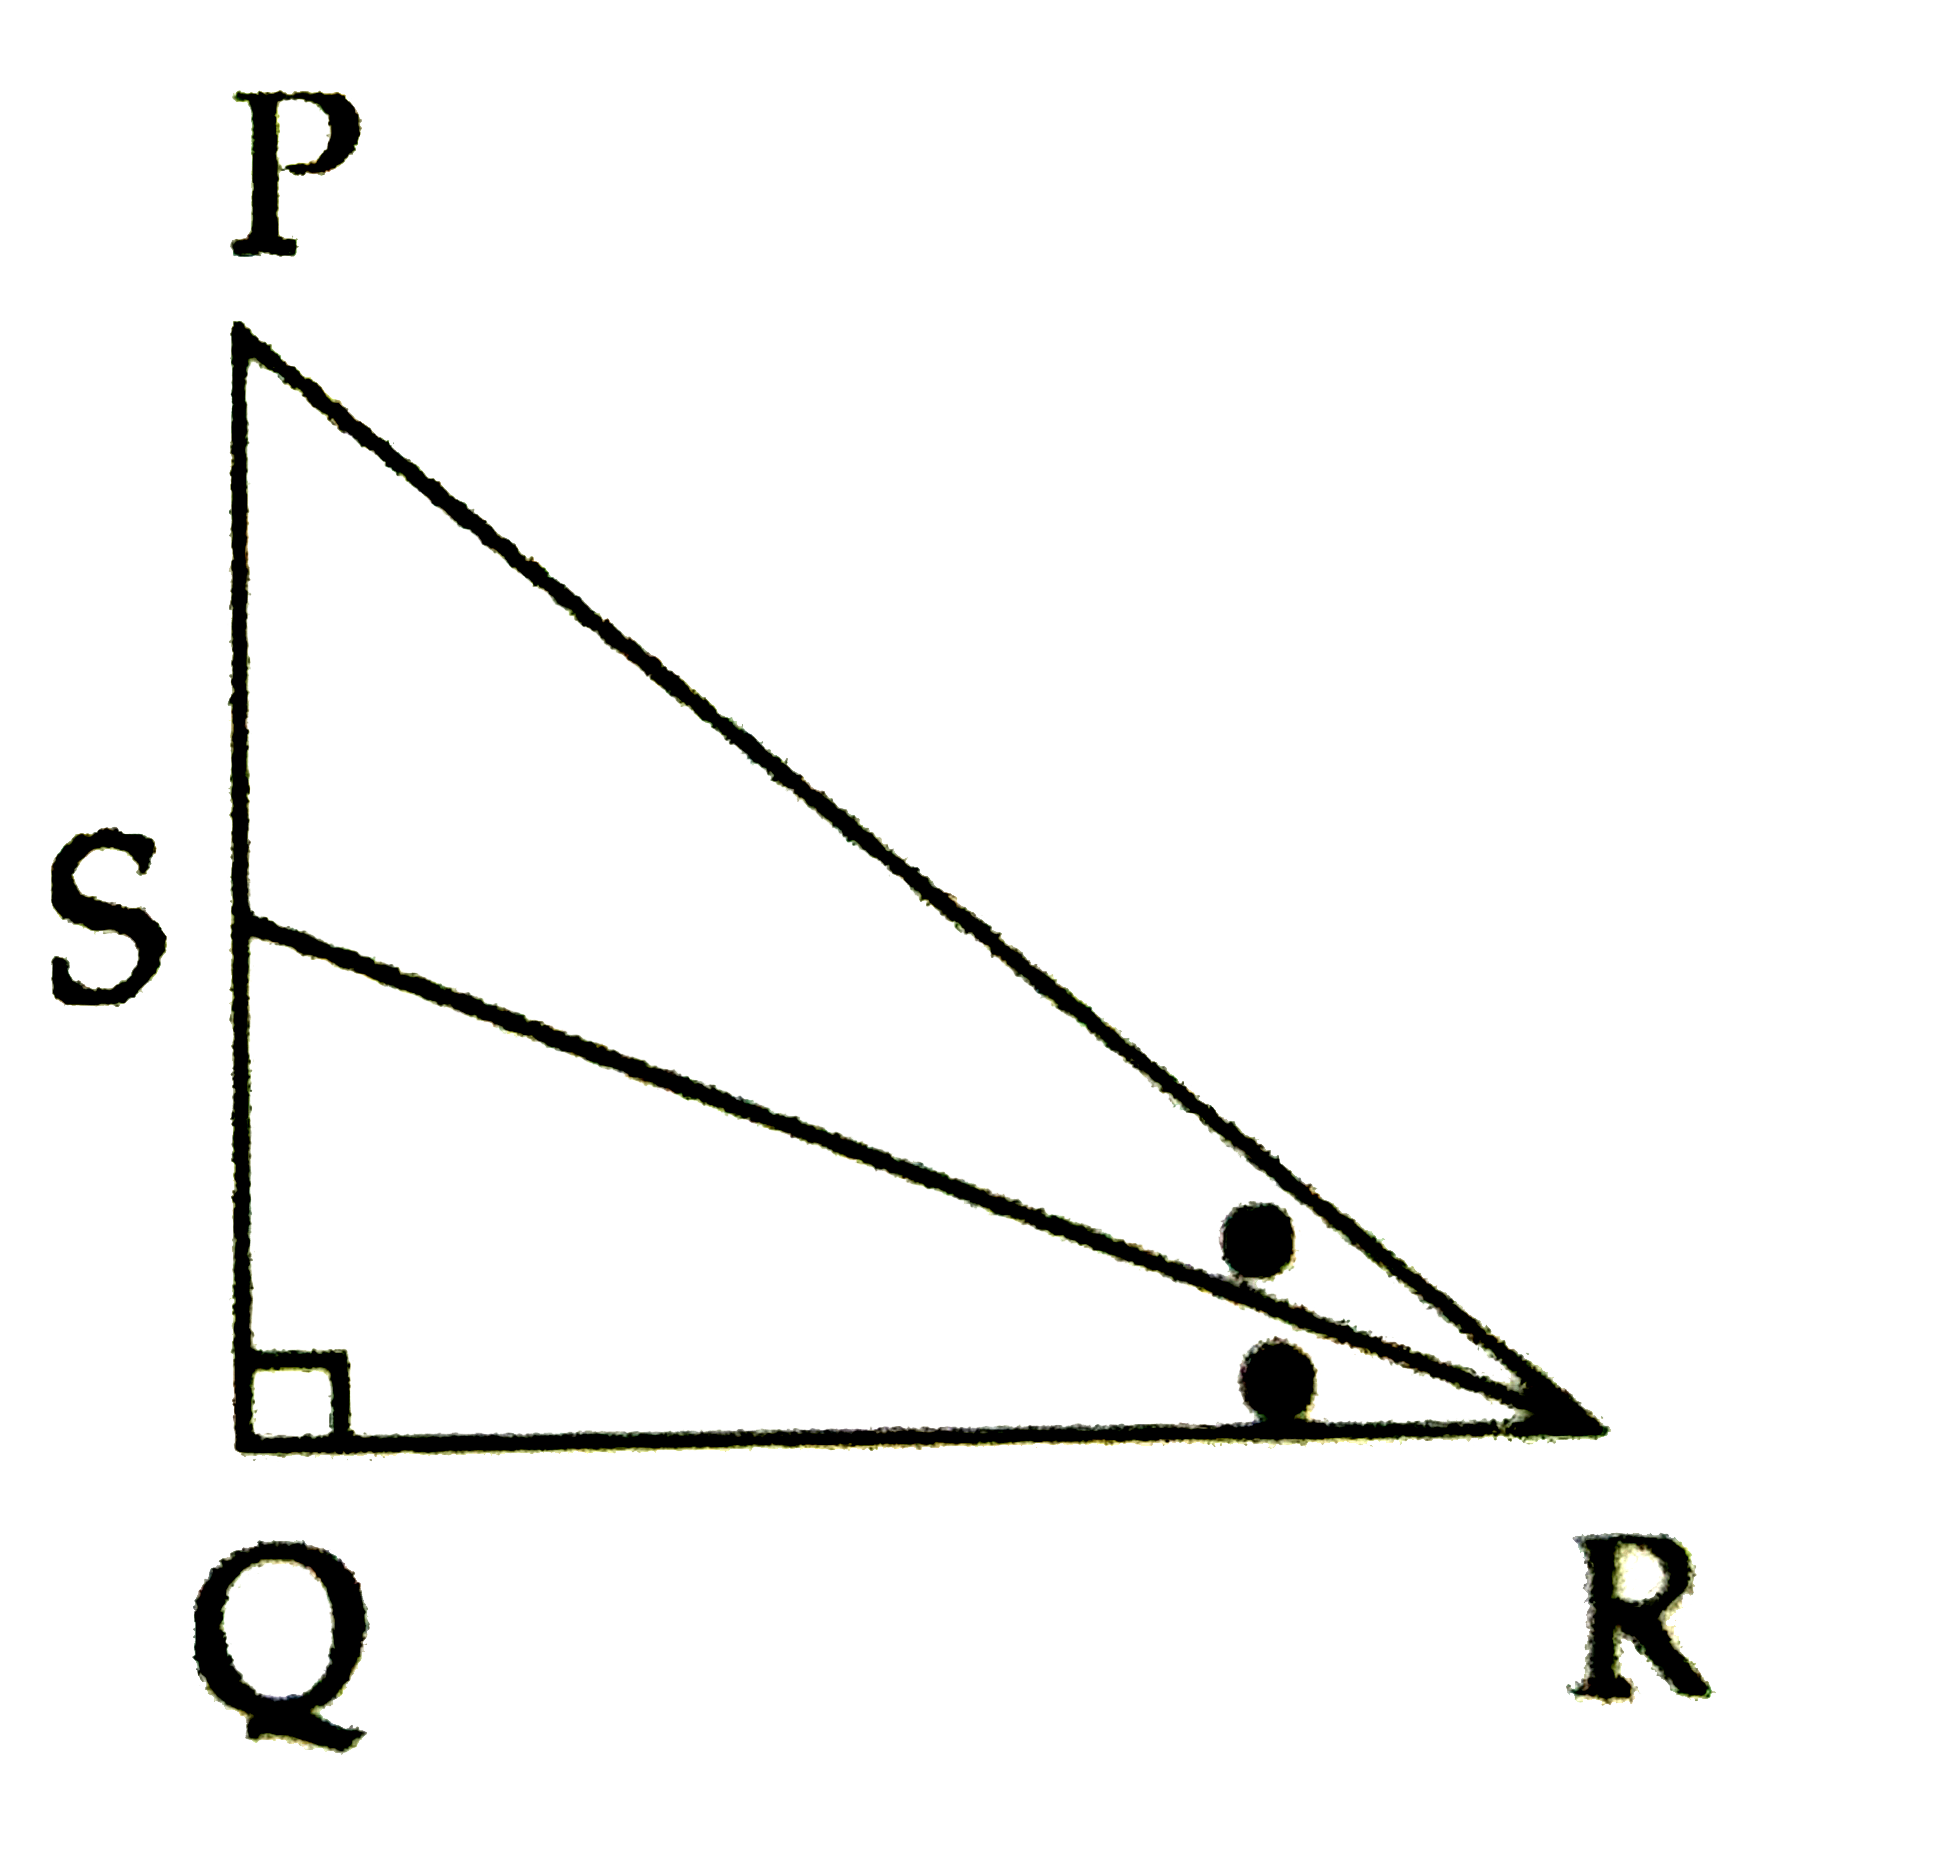 In DeltaPQR seg RS is bisector of  anglePRQ.PS=6, SQ=8,PR=15. Find QR.